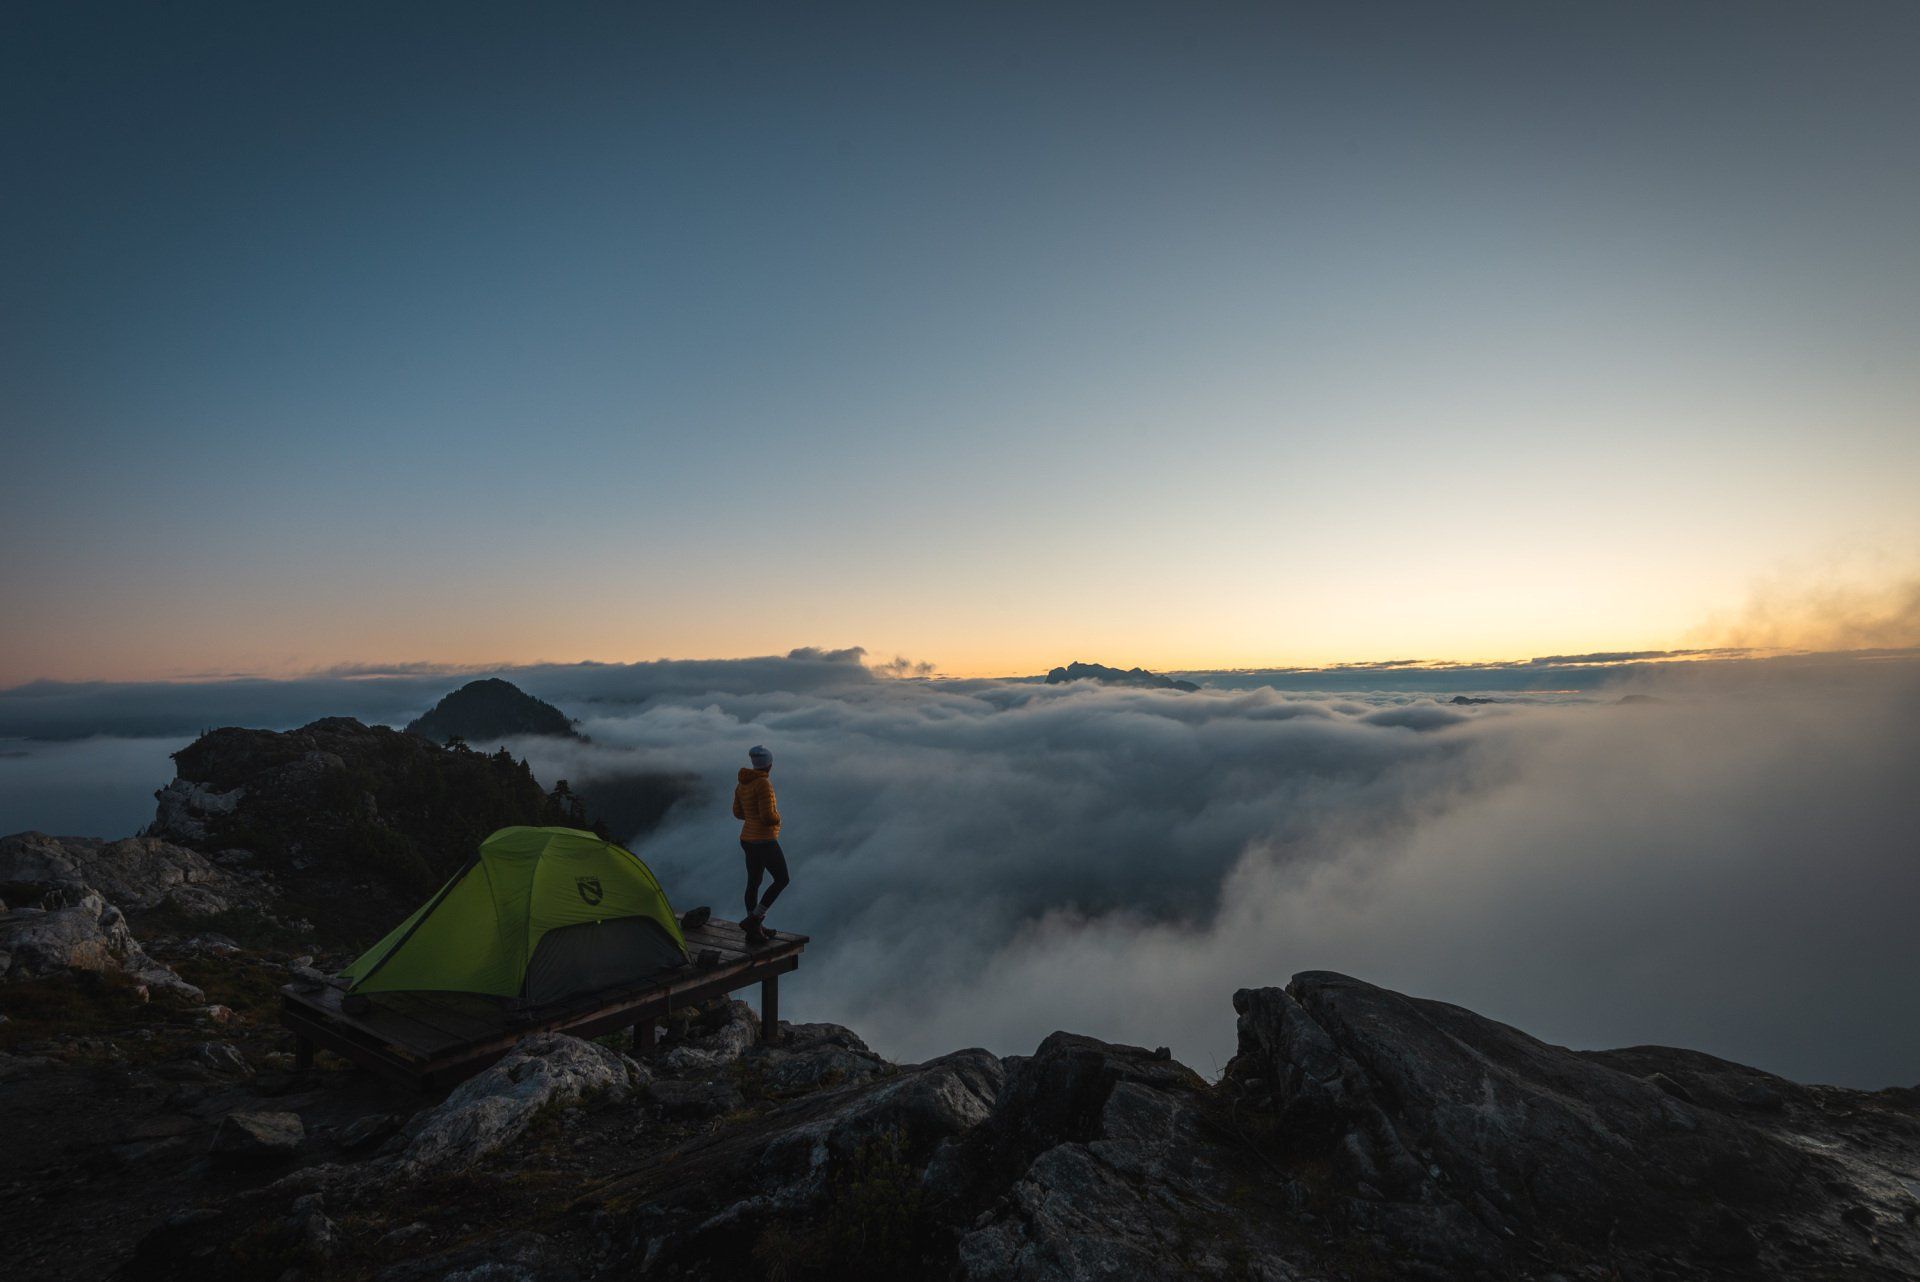 View of a tent and cloud inversion on the Panorama Ridge at Golden Ears mountain, BC, Canada